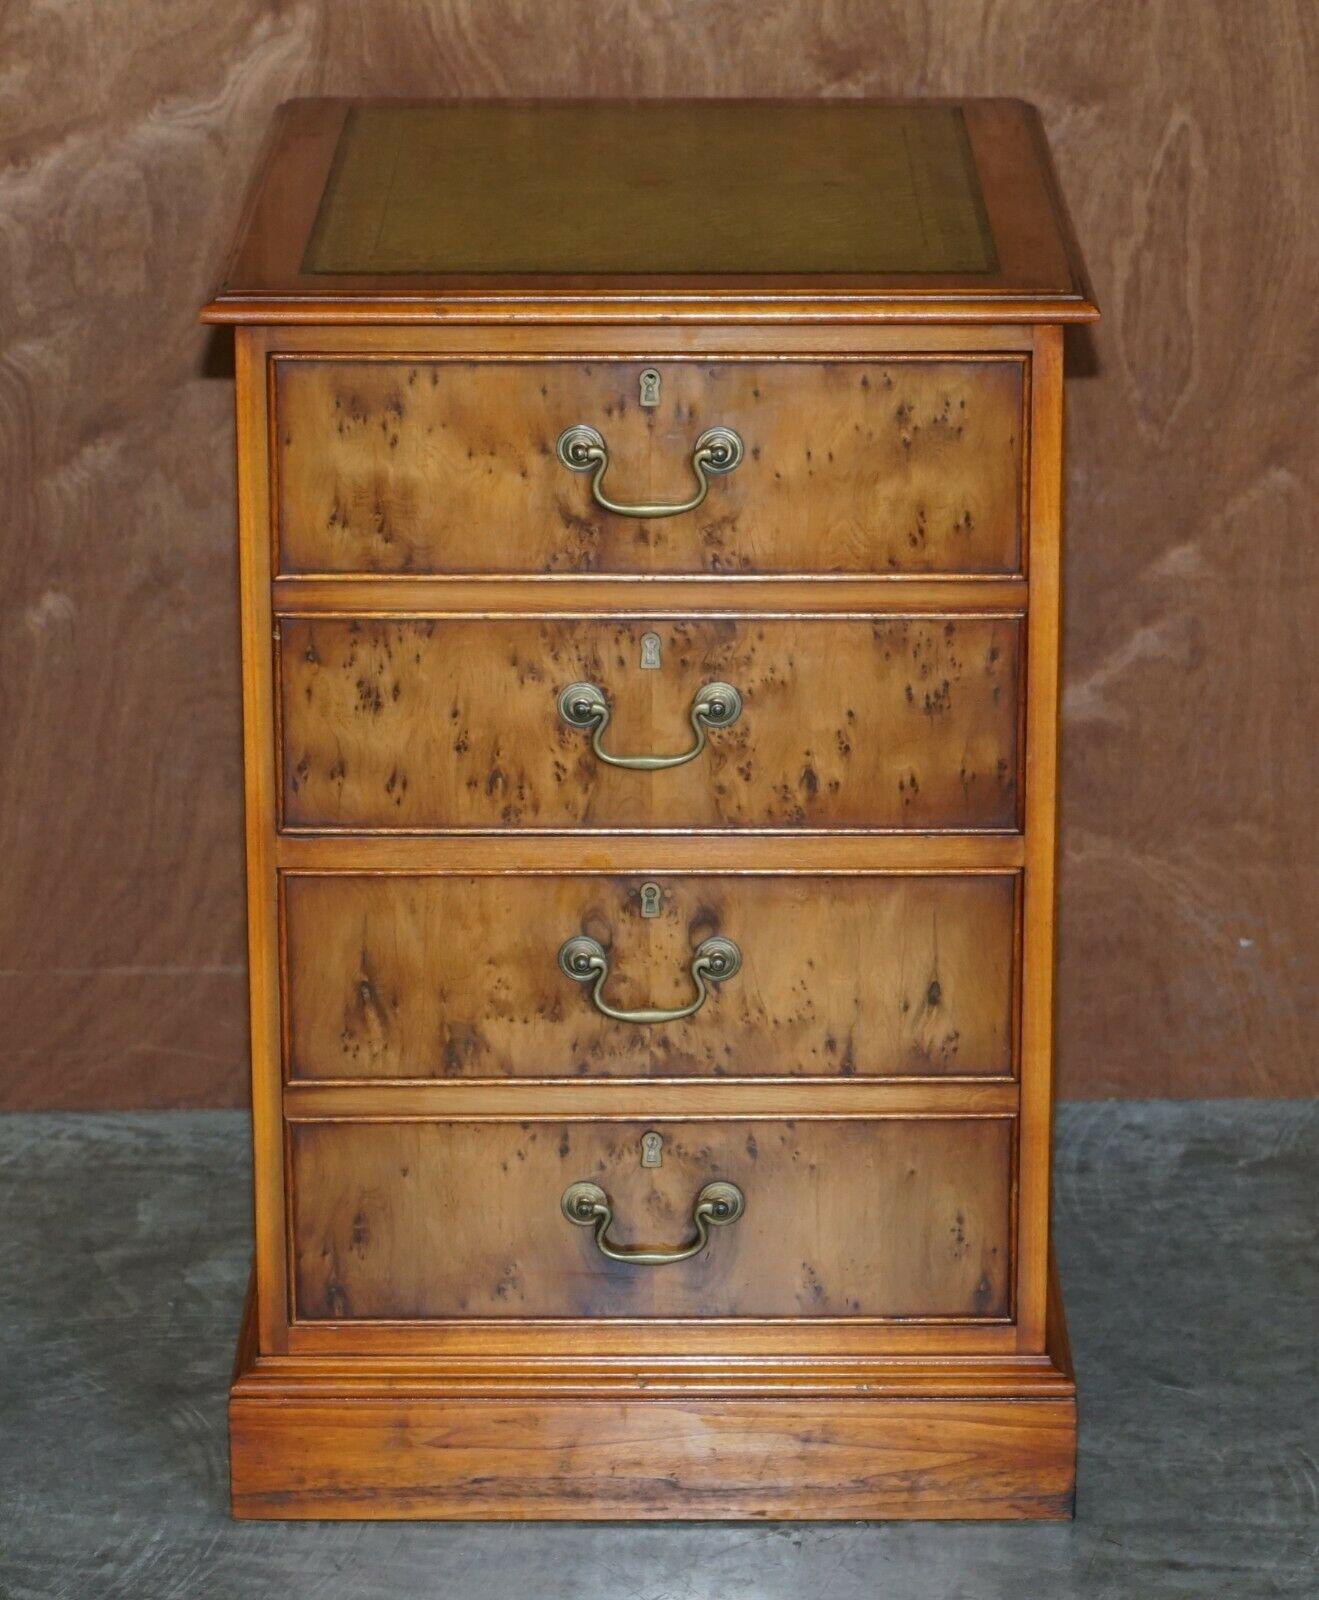 We are delighted to offer for sale this lovely burr yew wood filing cabinet with gold leaf embossed green leather top.

I have another of these listed under my other items in burr walnut.

A truly stunning piece, if burr yew is your thing or